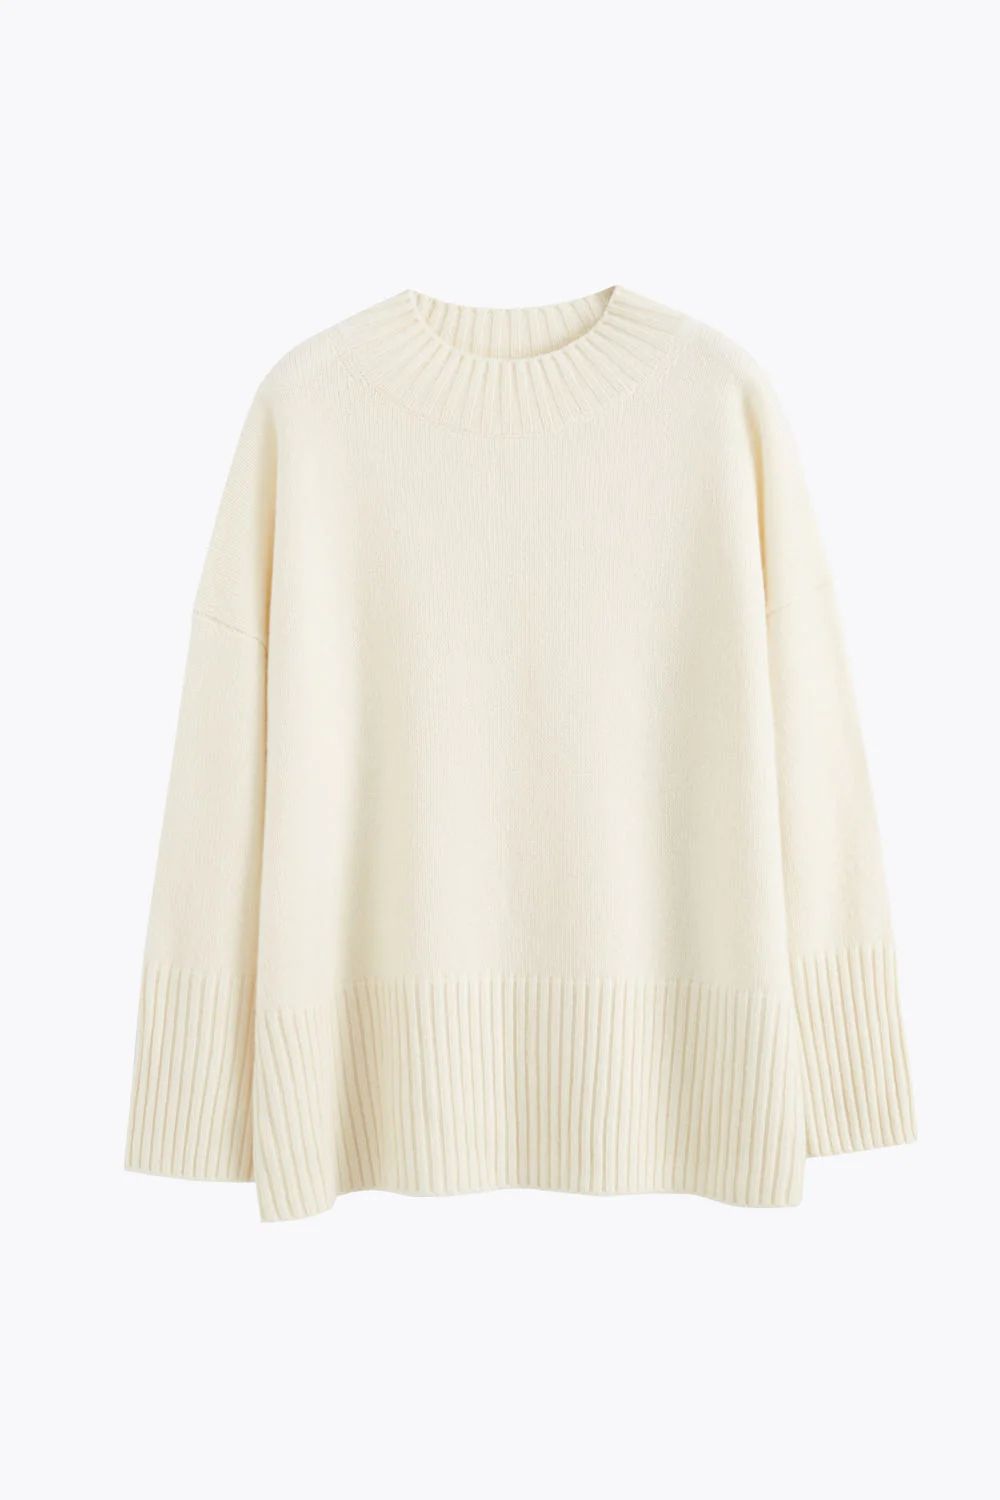 Cream Cashmere Comfort Sweater | Chinti and Parker